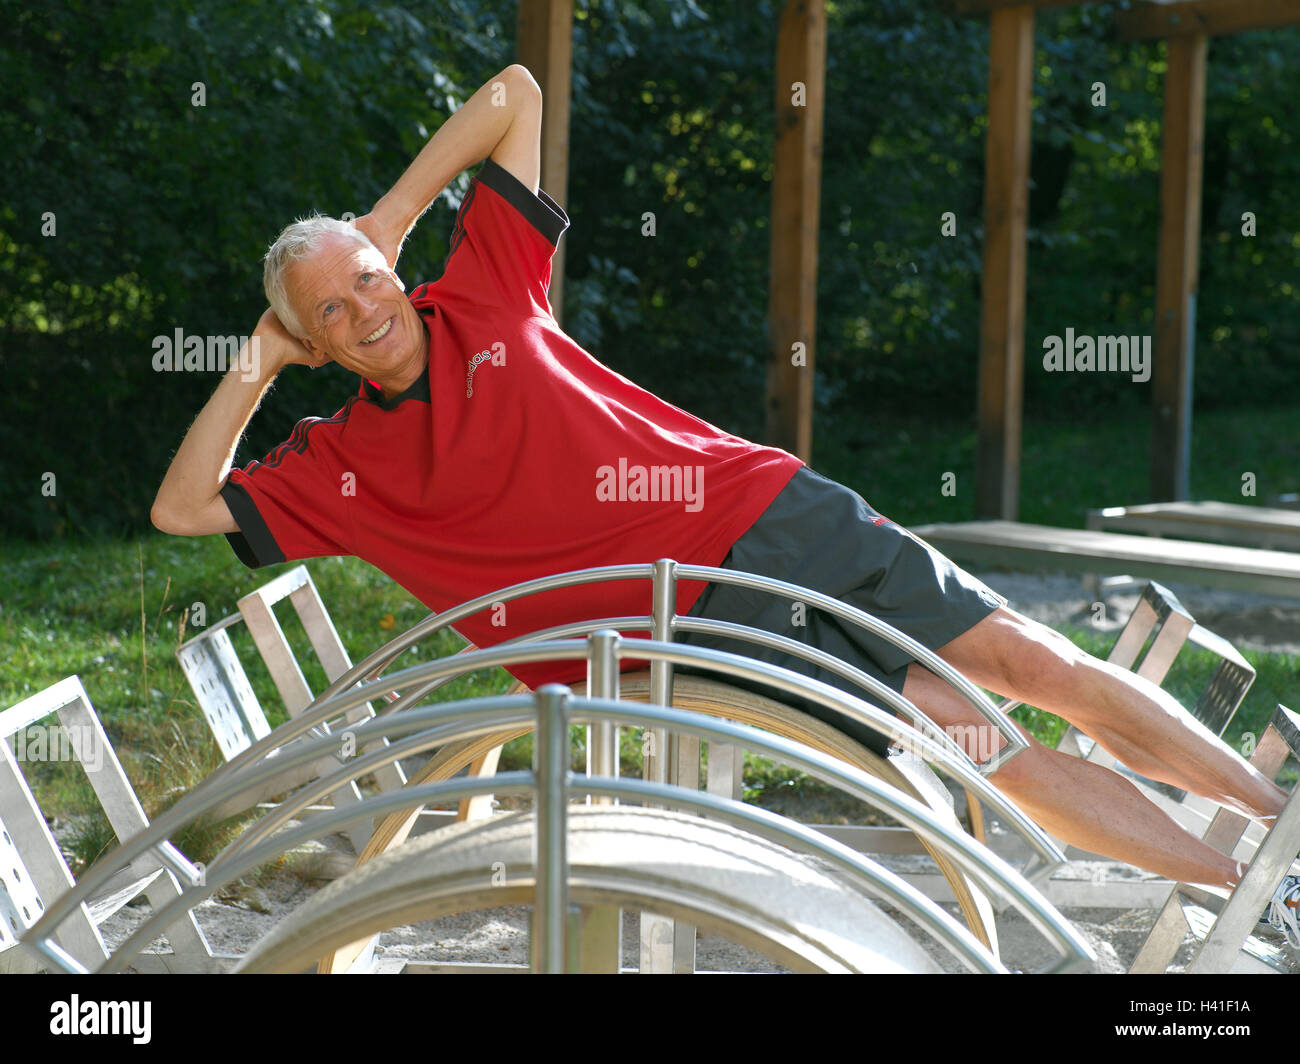 keep-fit trail, senior, training device, lie side view, practise, abdominal musculature 50-60 years, man, sportsman, sportily, sport, activity, gymnastics, gymnastics exercises, gymnastics practise, health, fitness, training, musculature, strengthening, s Stock Photo